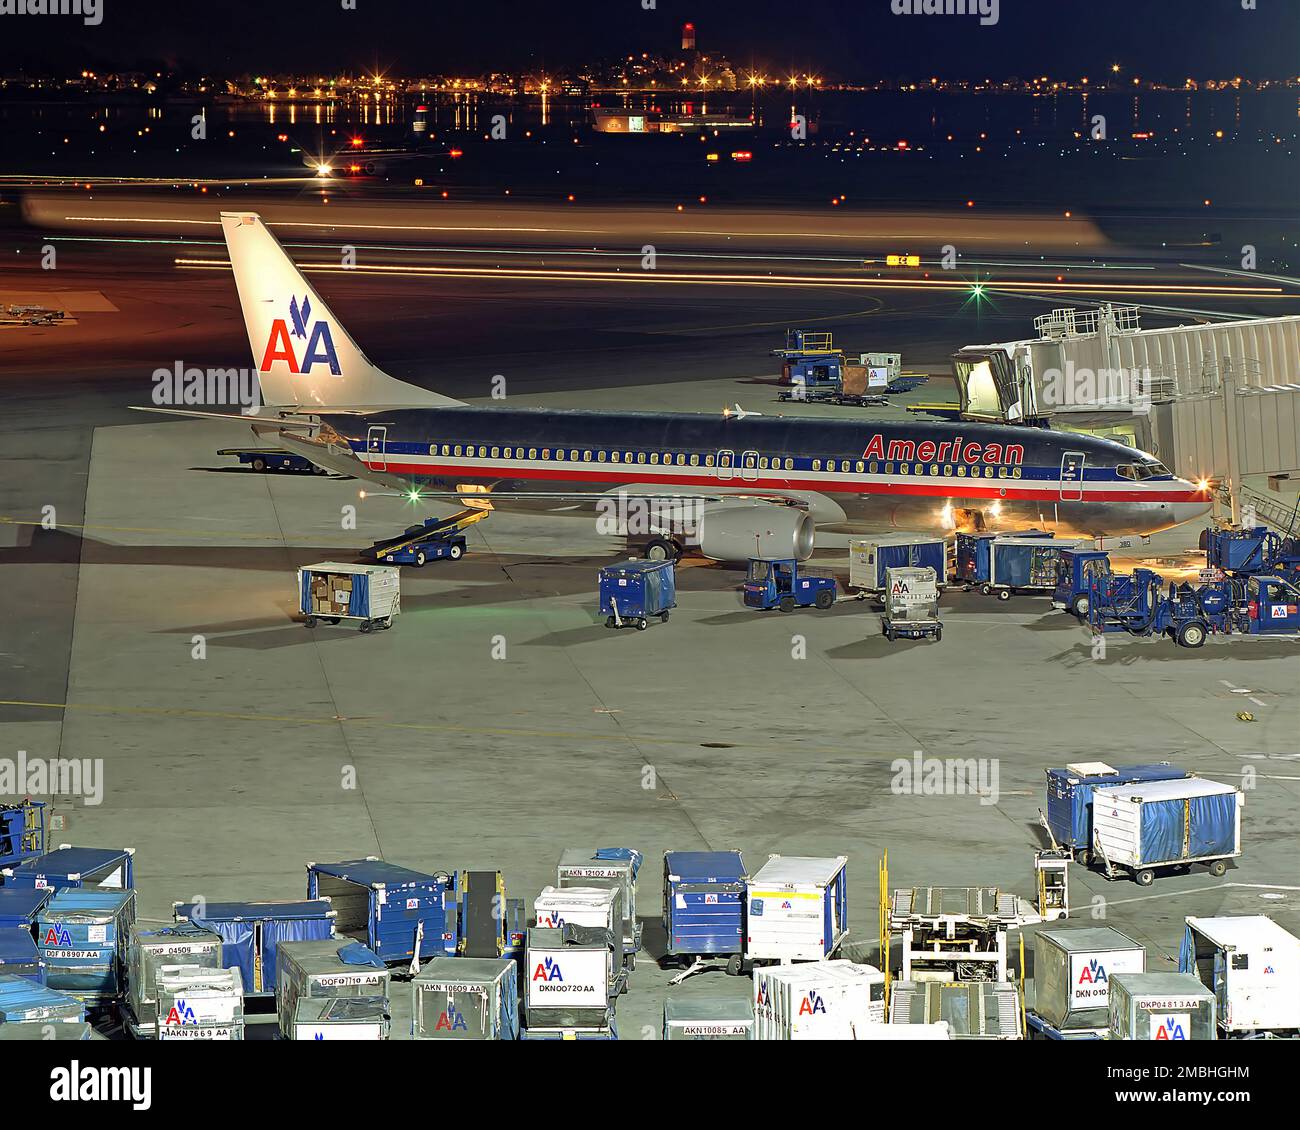 American Airlines 737 plane prepares for departure with baggage cart handlers, vintage night photo Stock Photo